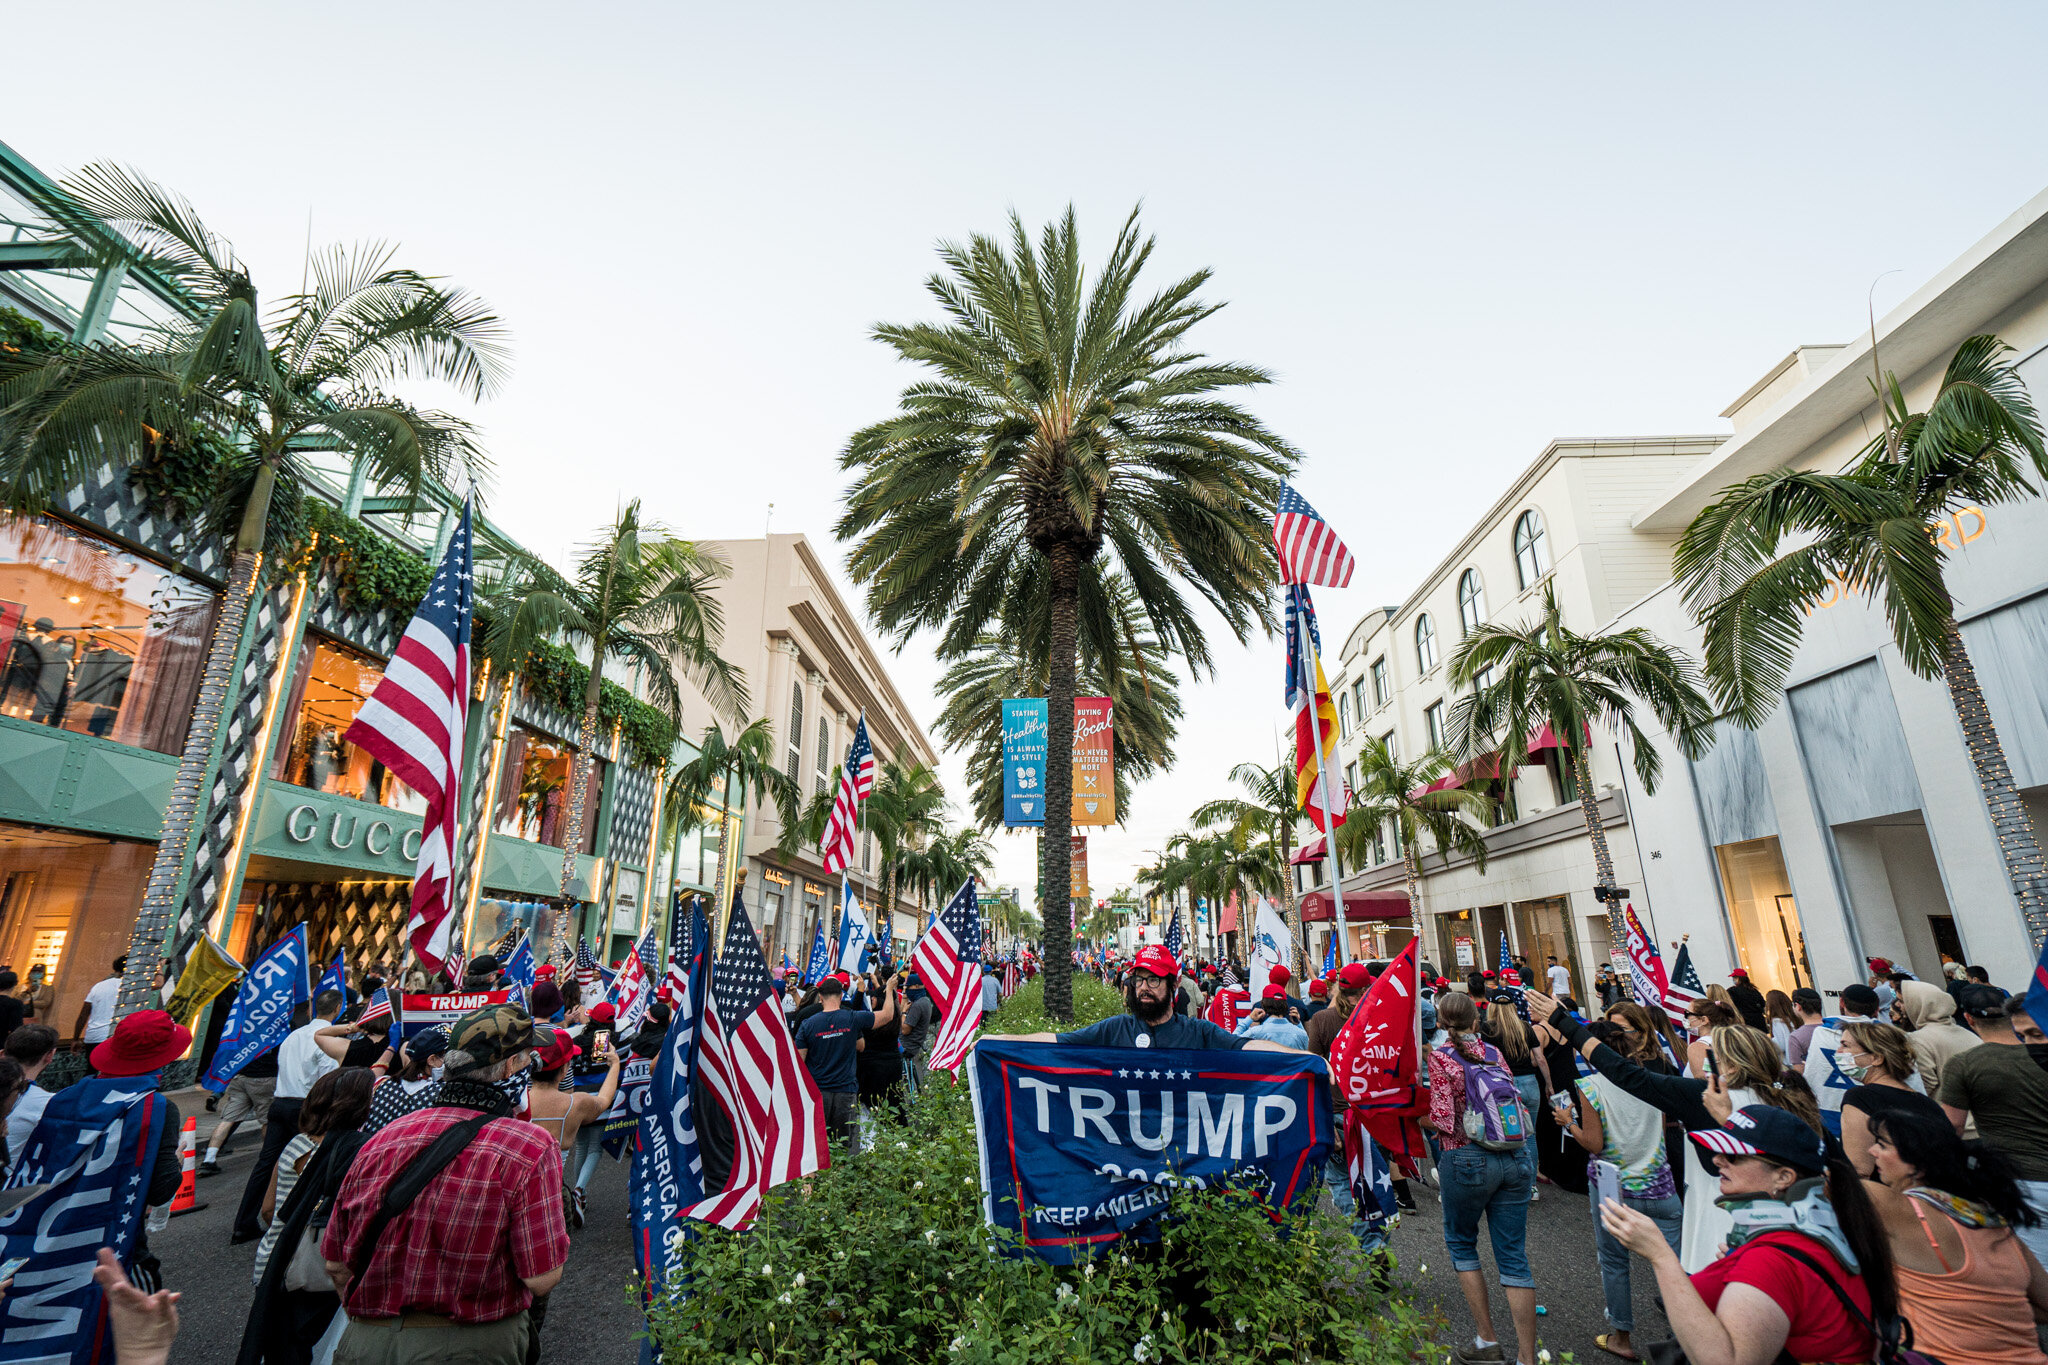  With just over twenty-four hours until election day, Trump supporters assembled in Beverly Hills, California on 11/1/2020. The group stationed themselves on Santa Monica Boulevard, and then proceeded to march down Beverly Blvd. and Rodeo Drive to sh